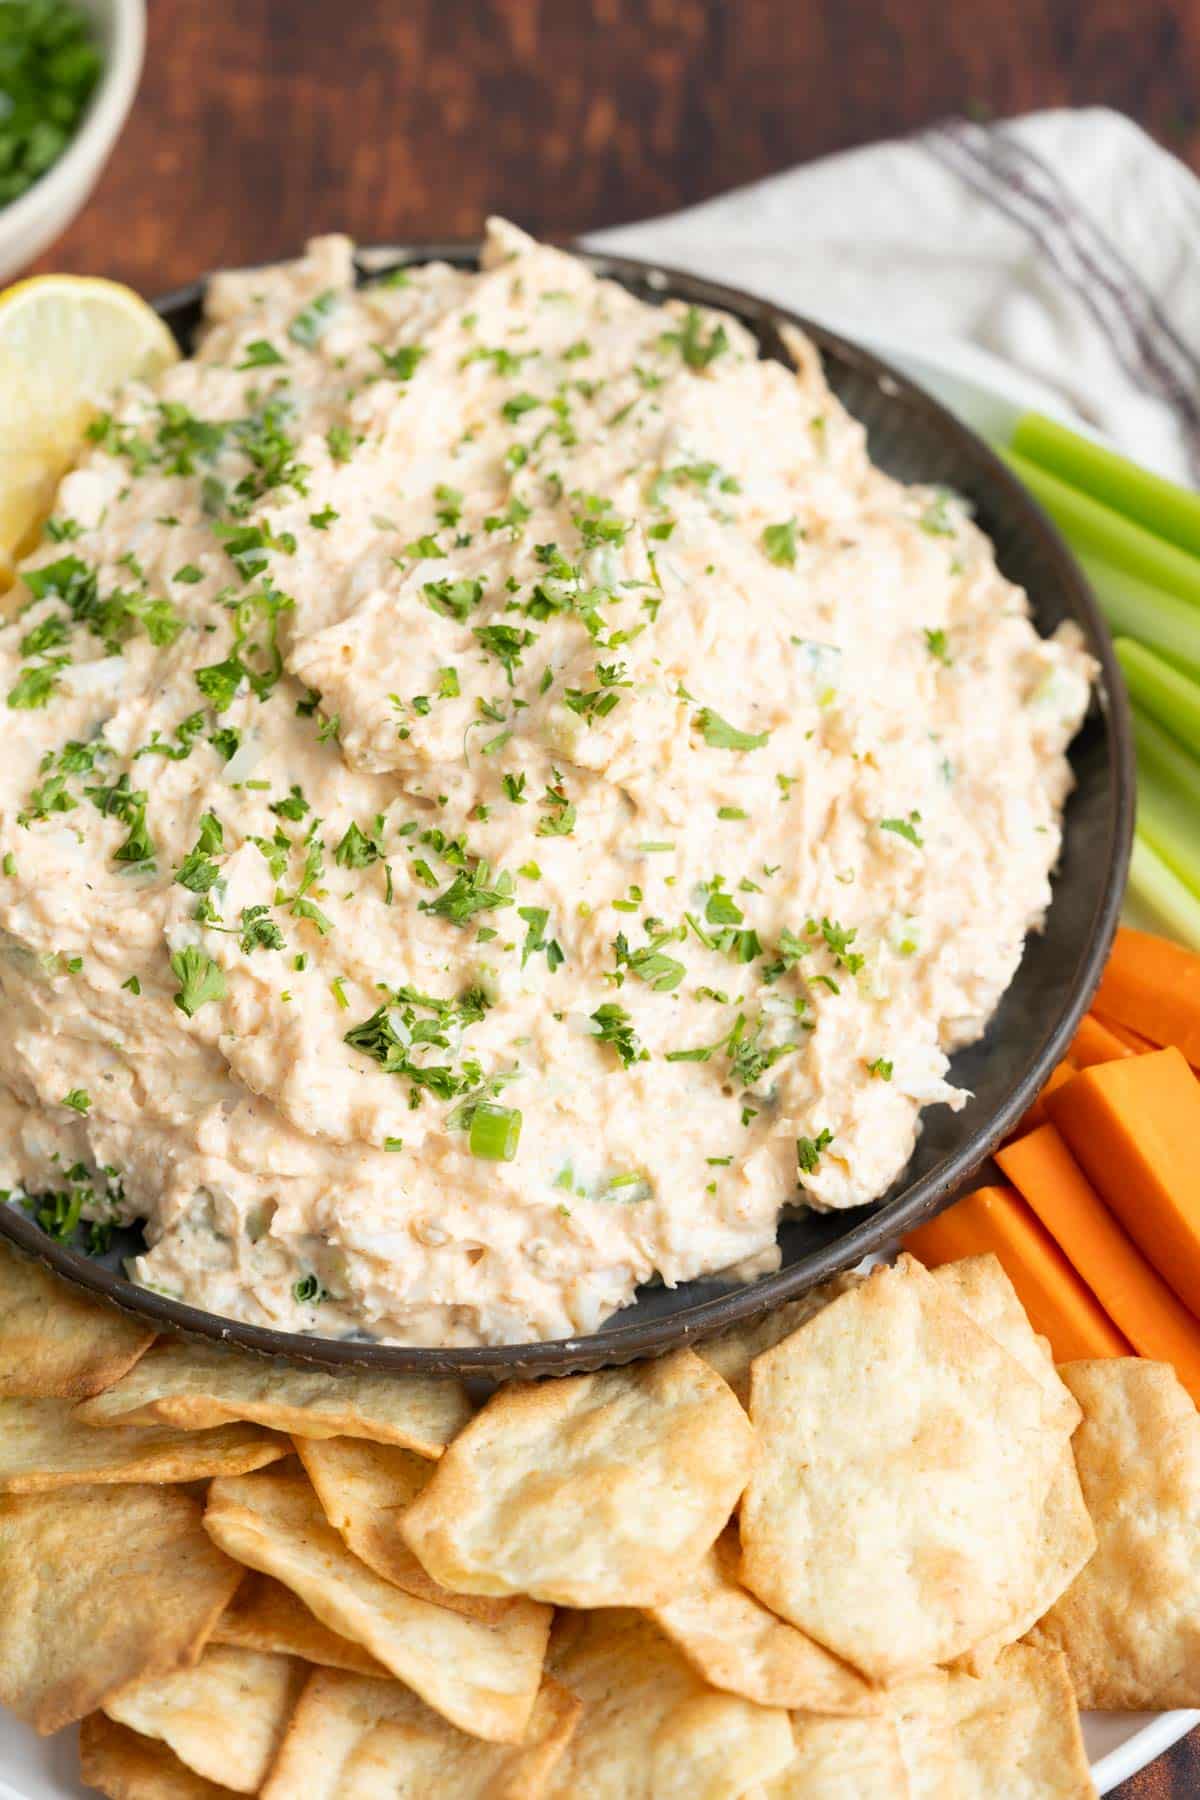 Spicy Cajun crab dip in a bowl with sides of vegetables and crackers.